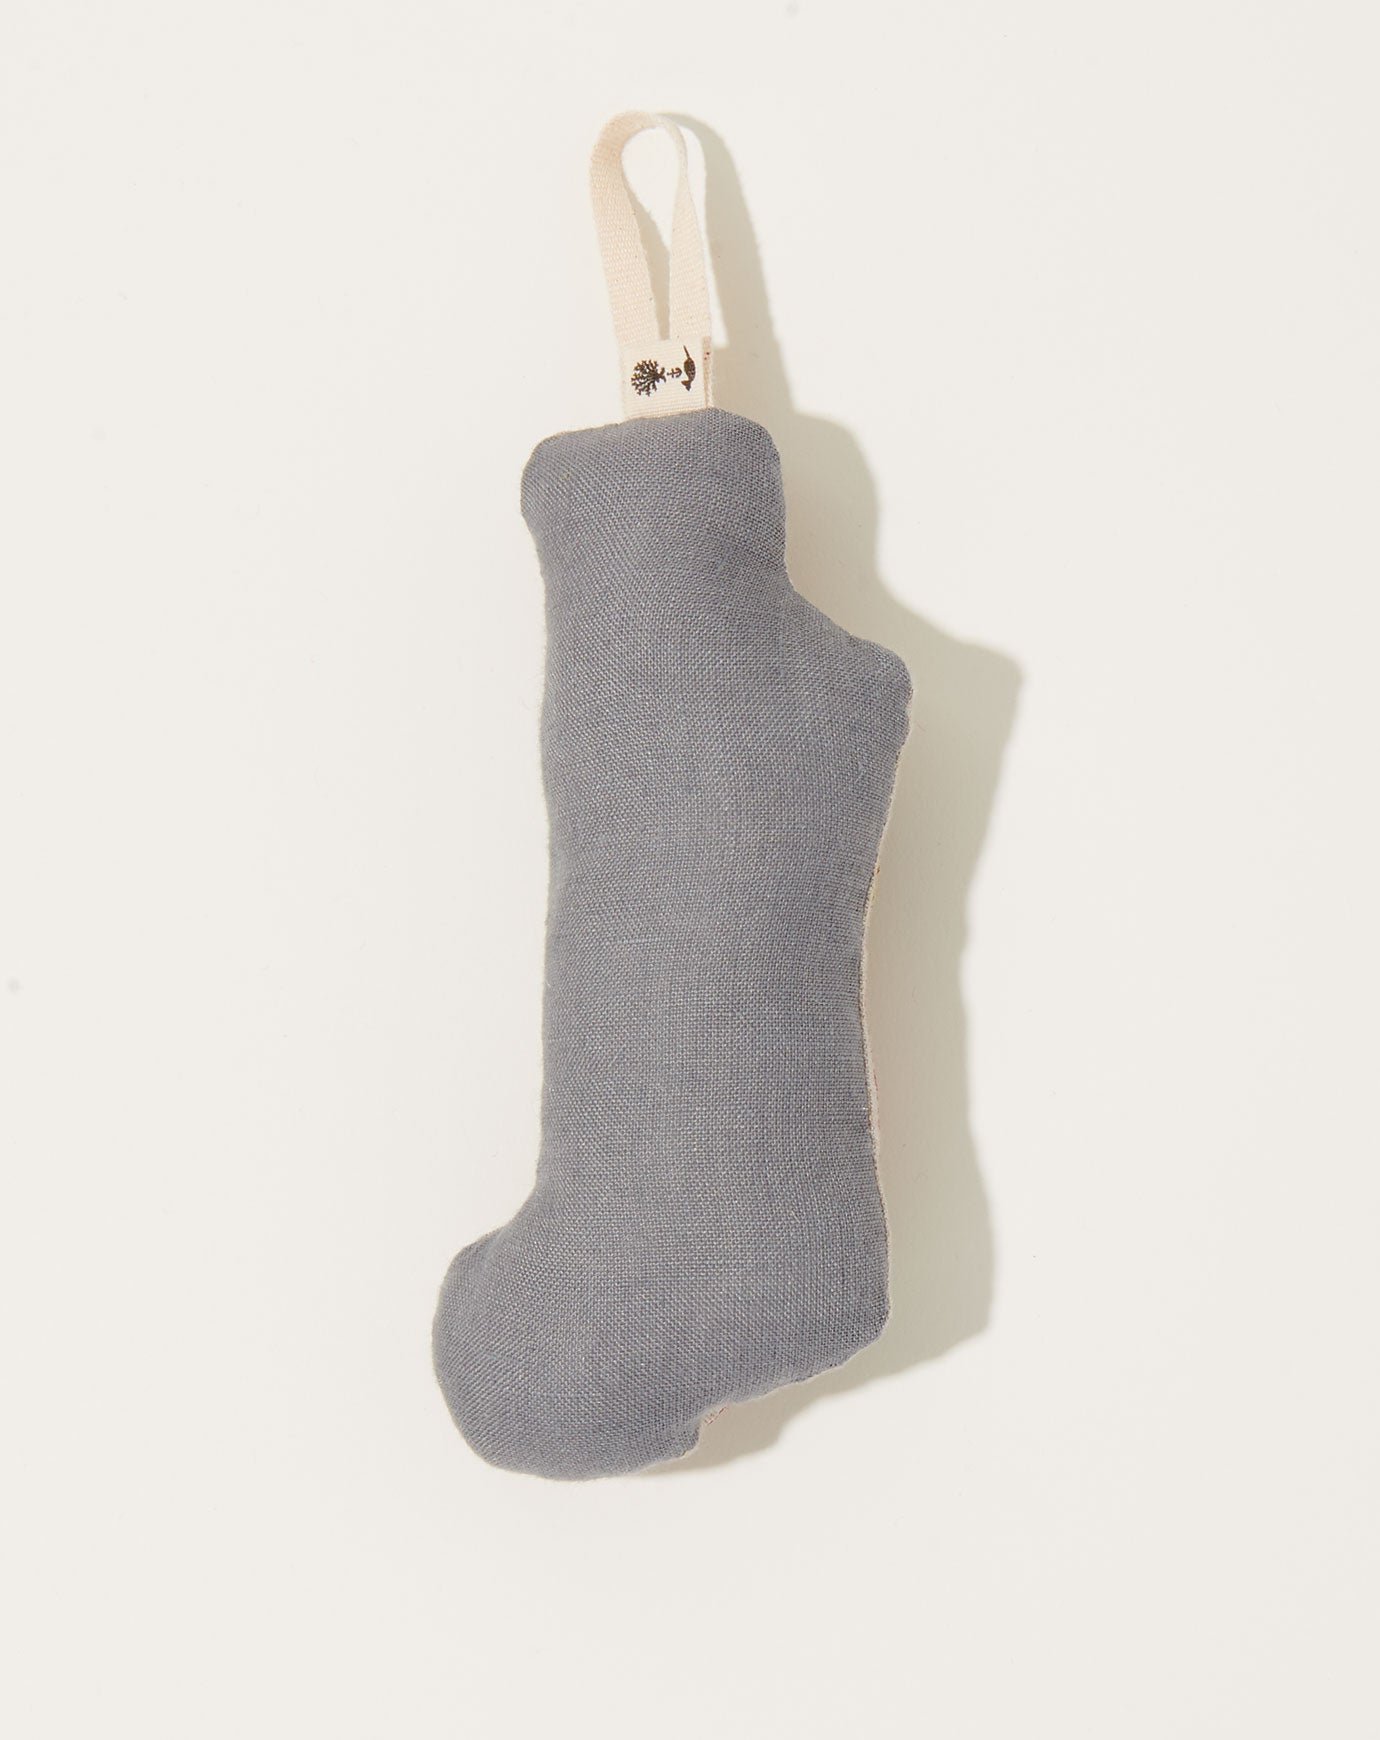 Coral & Tusk Puppy Stocking Ornament